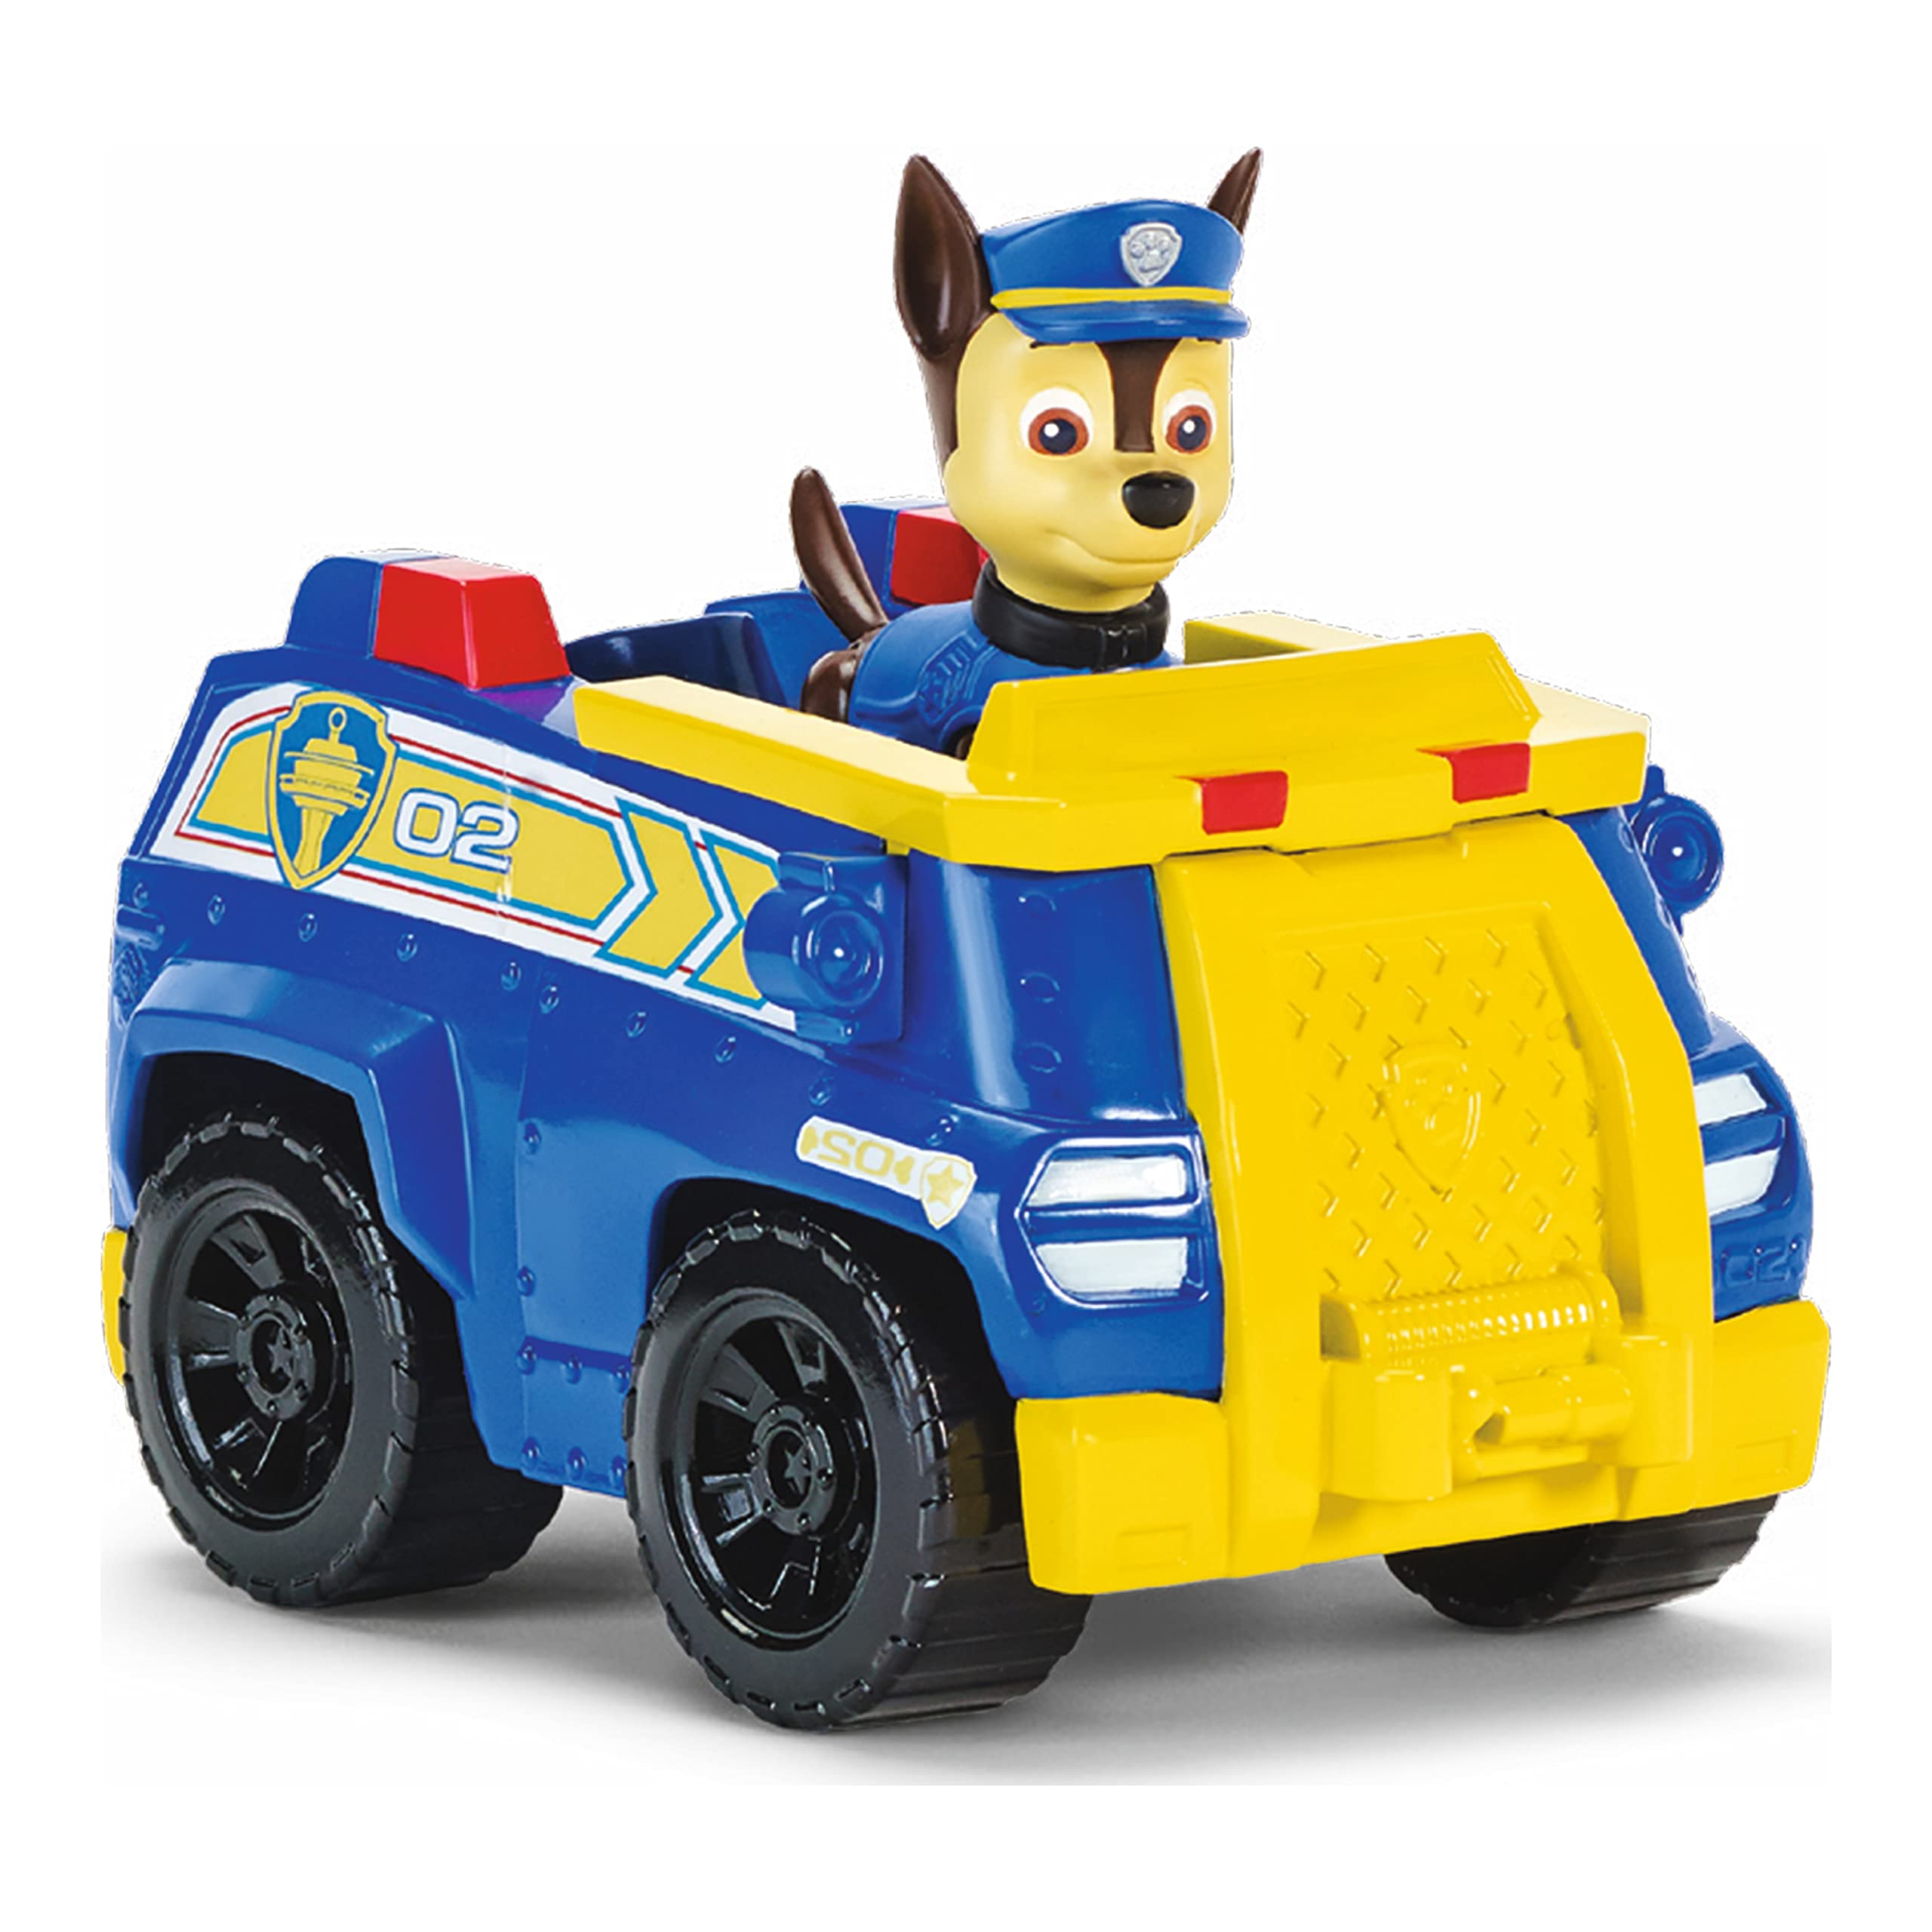 Paw Patrol, My Size Lookout Tower with Exclusive Vehicle Toy, Rotating Periscope and Lights and Sounds